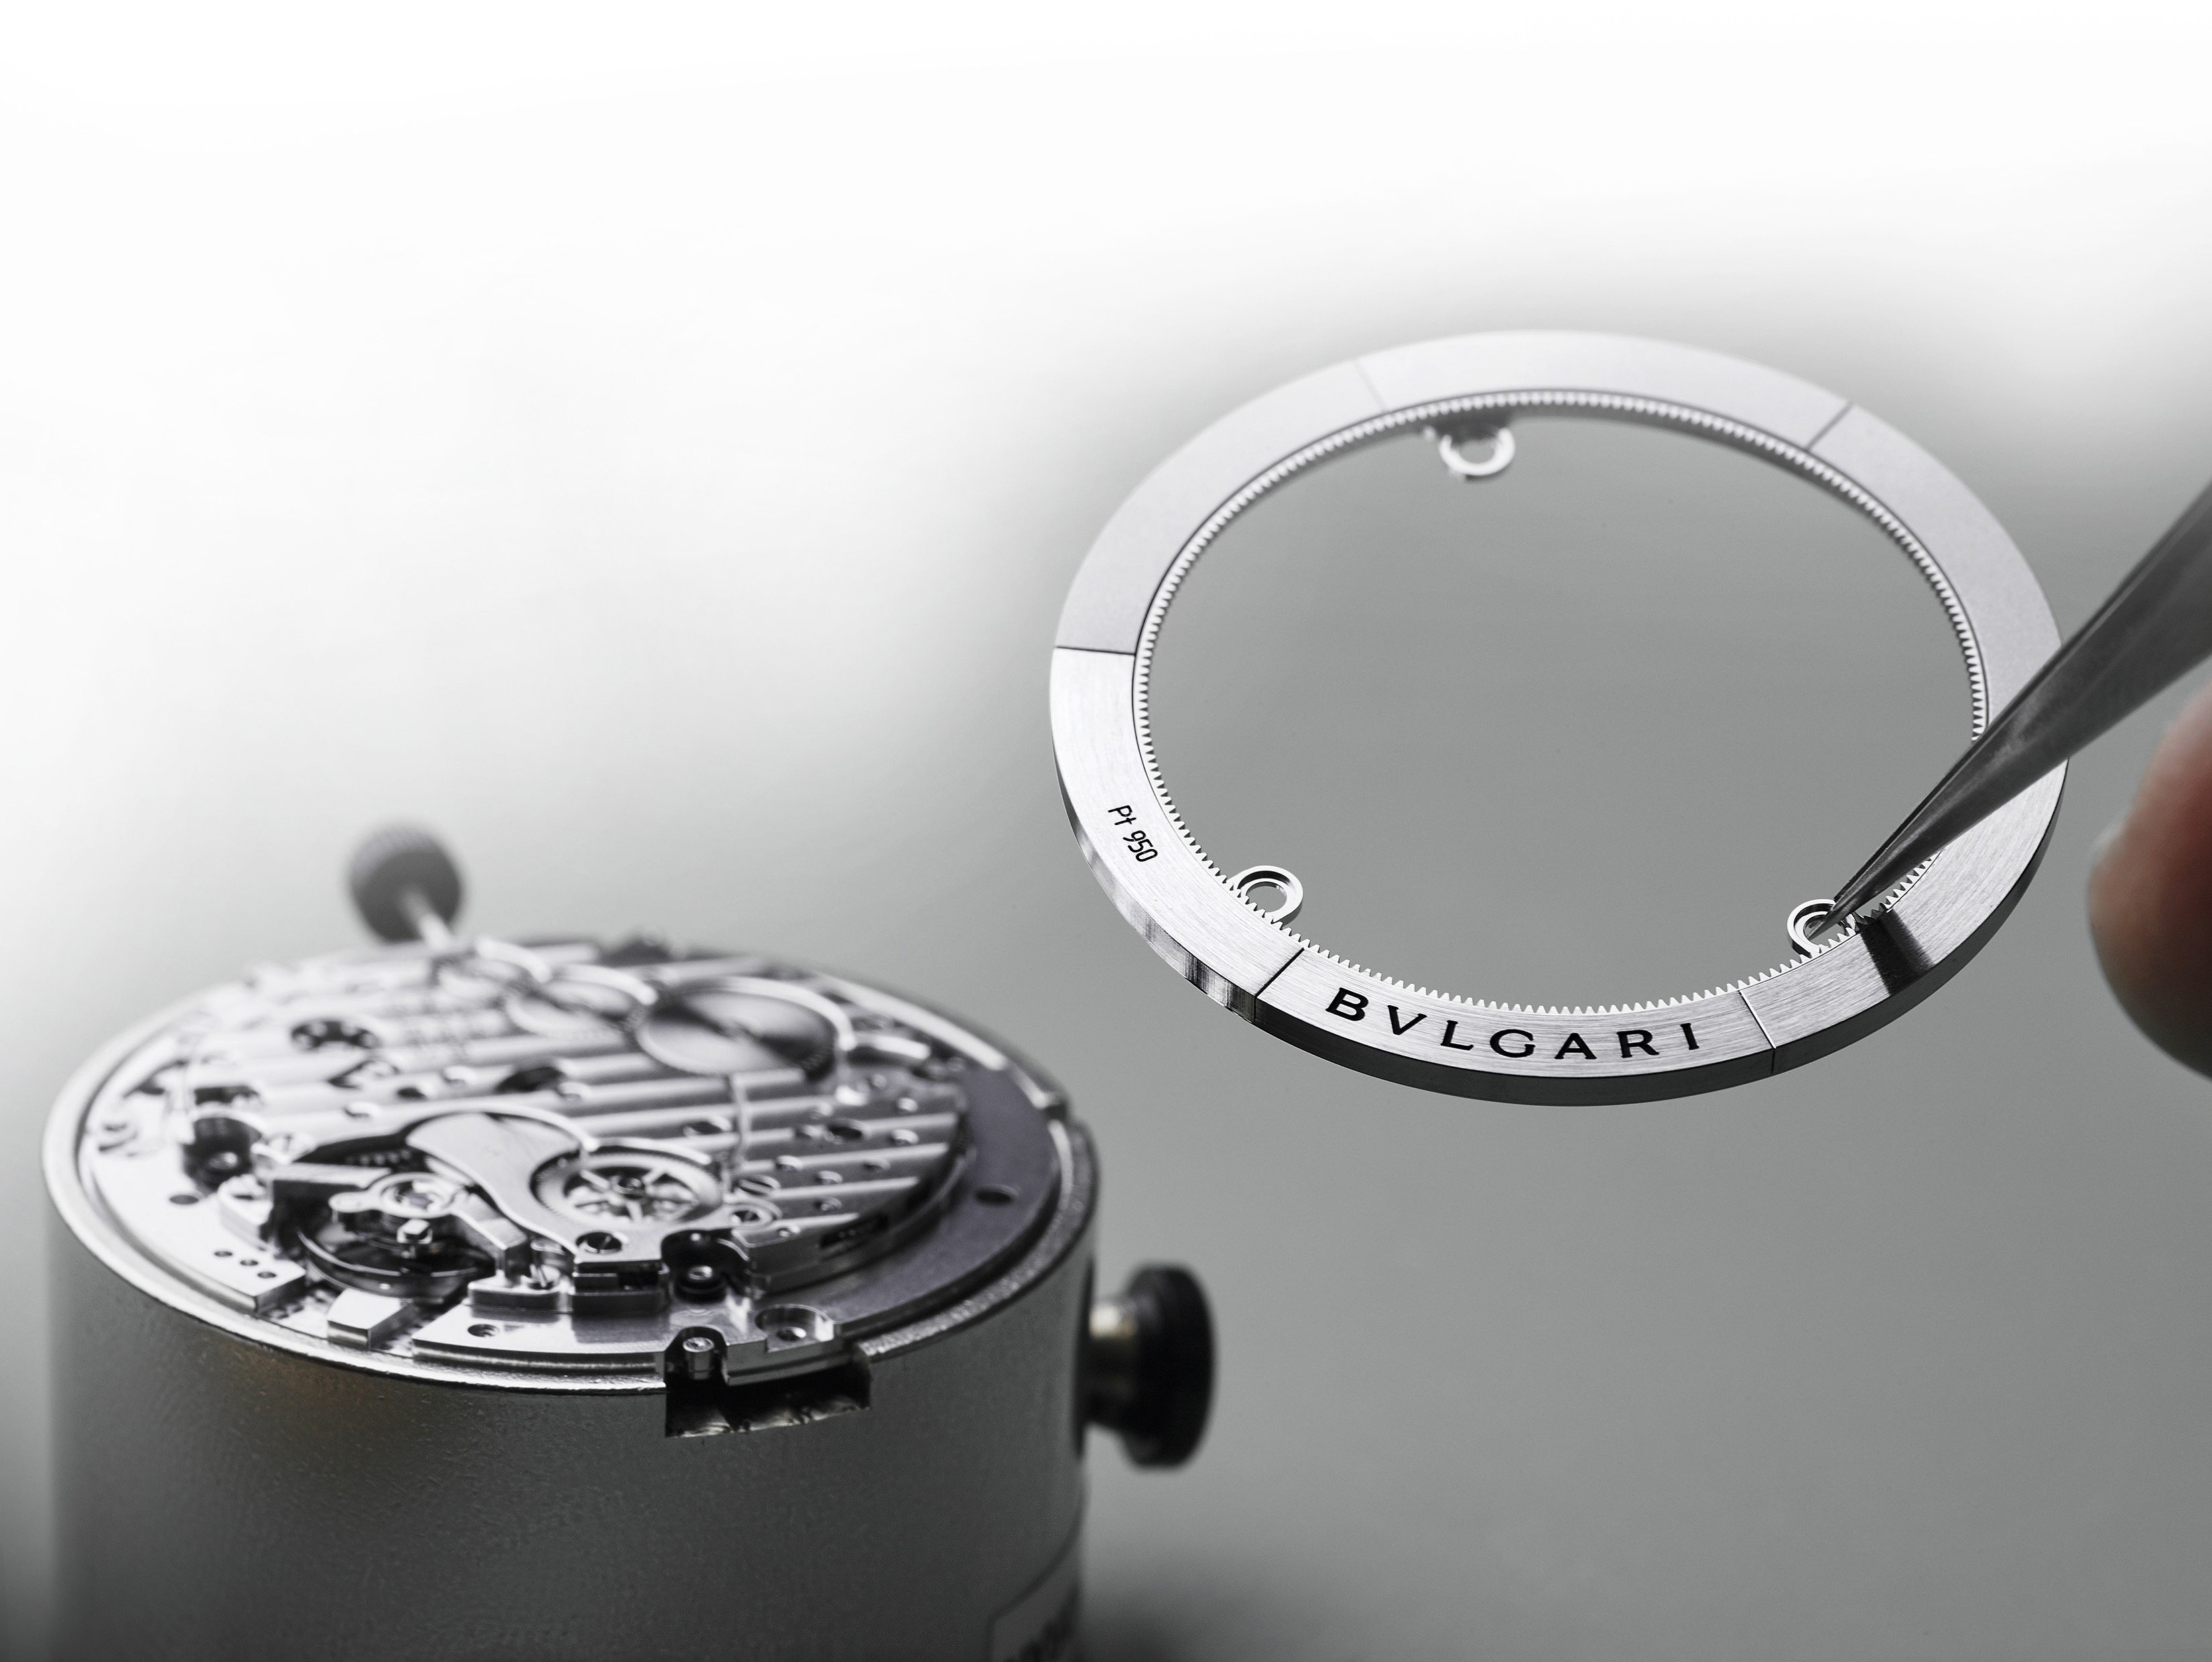 Bulgari’s Octo Finissimo Chronograph GMT Automatic is superbly engineered.